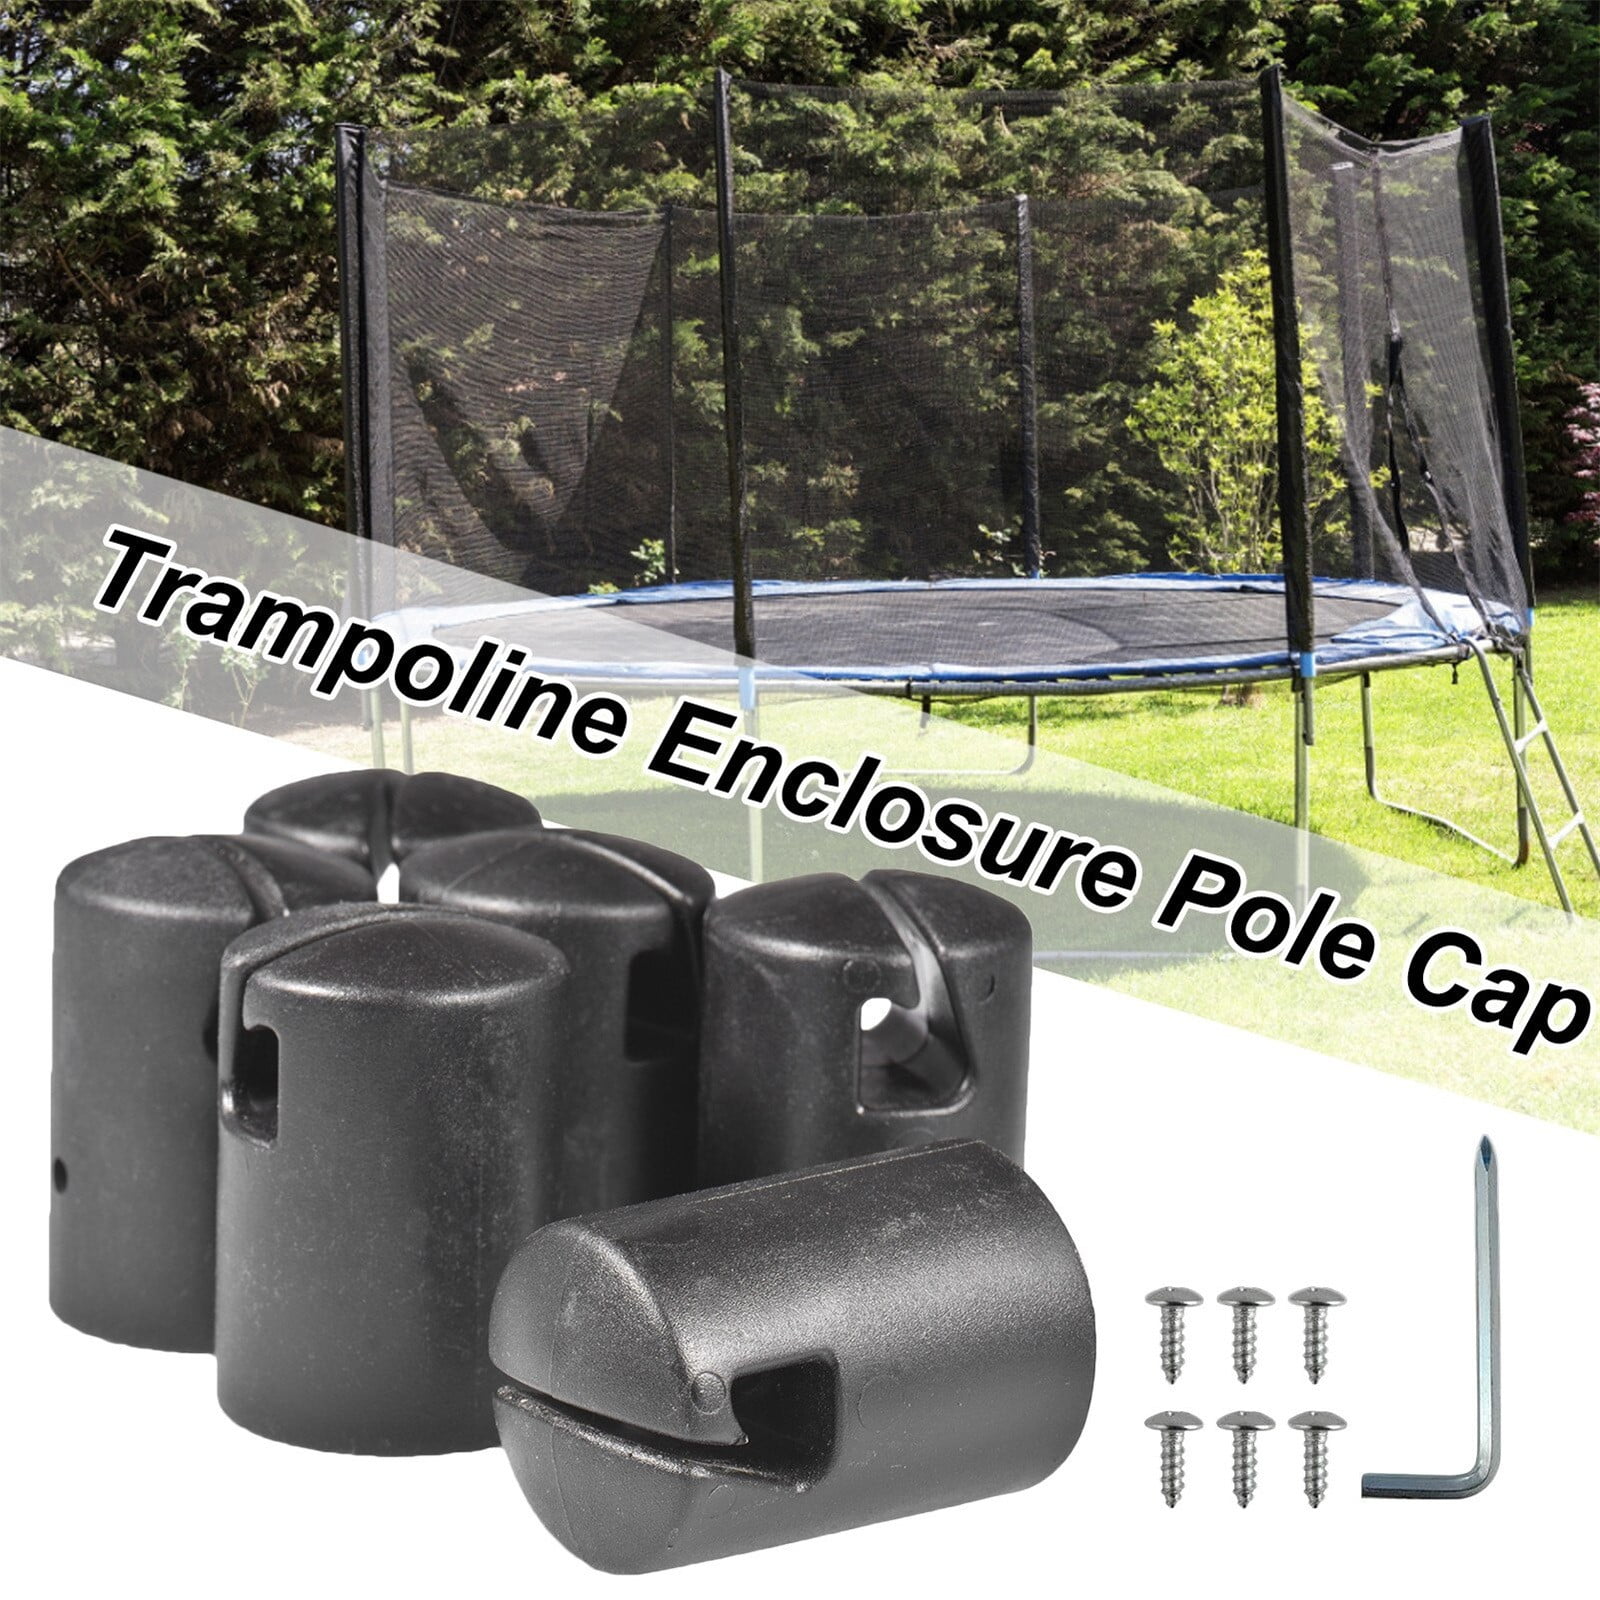 ZIZILAND Trampoline Enclosure Pole Cap for Flat Steel Sheet Top Ring System 6 Pieces Black 